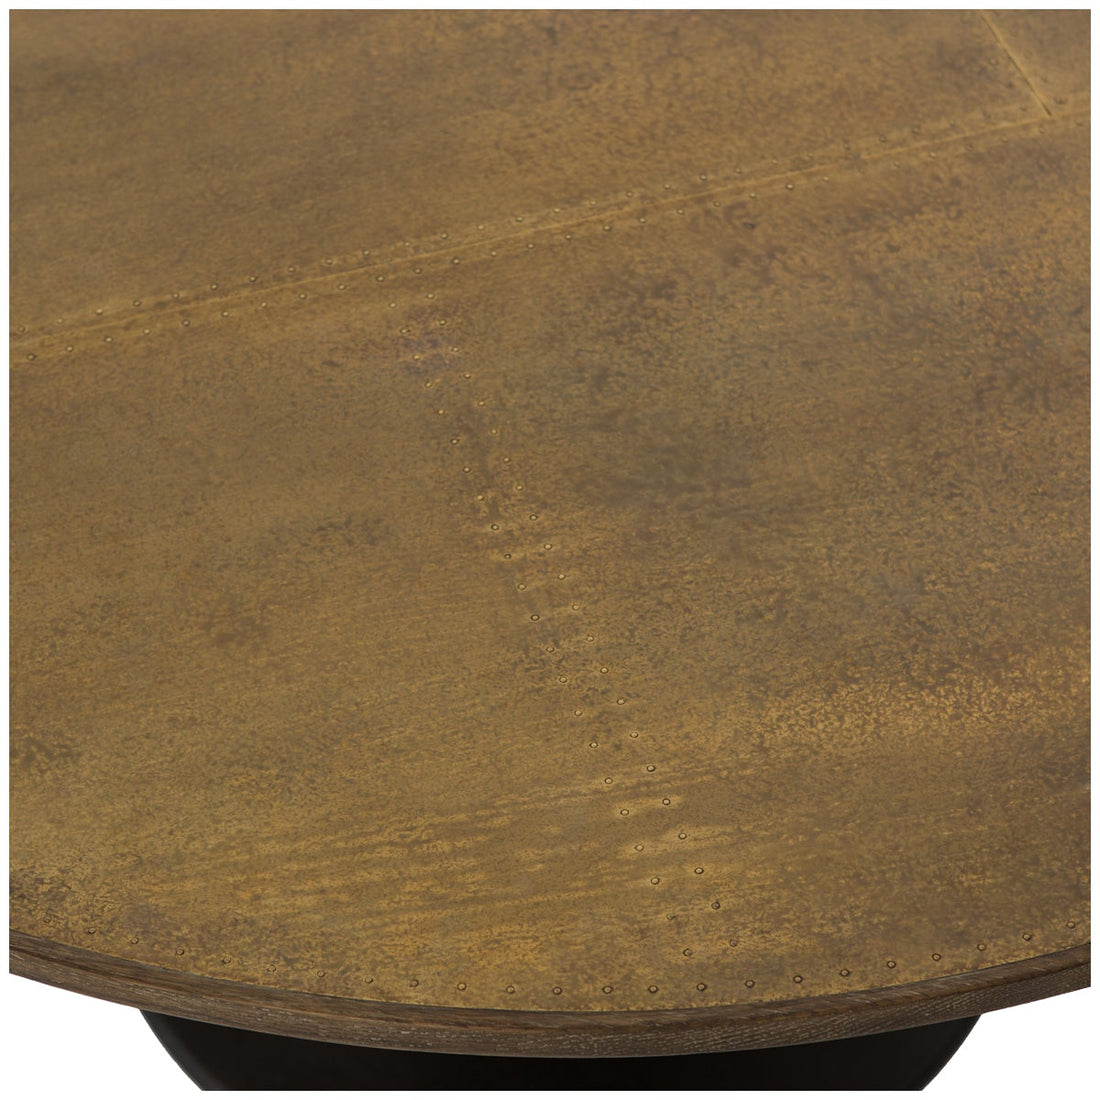 Four Hands Hughes Powell Dining Table - Bright Brass Clad